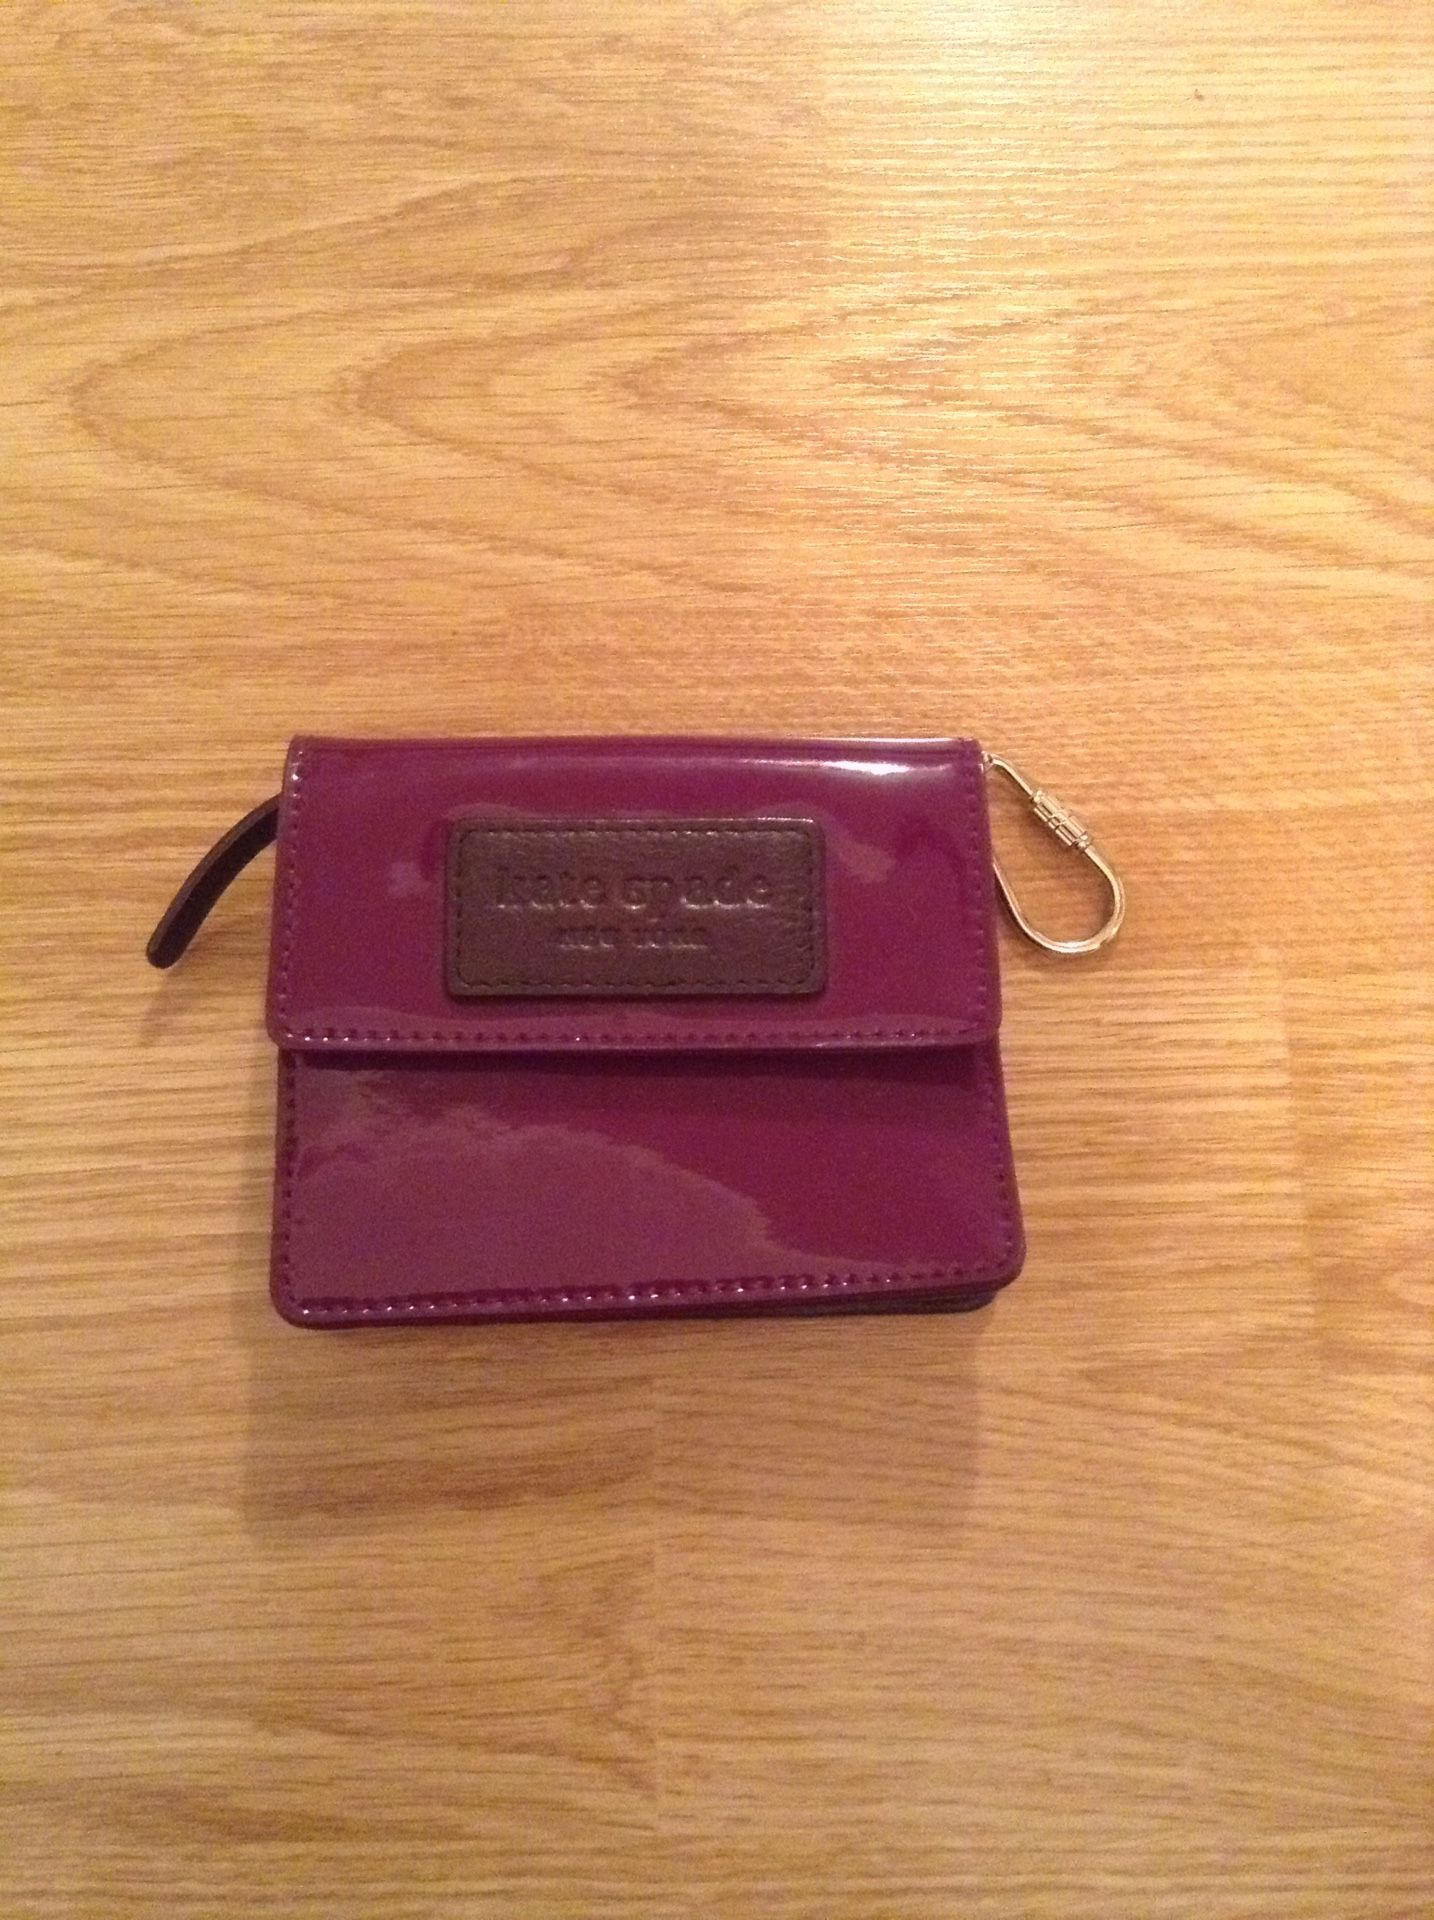 Kate Spade purple patent leather wallet